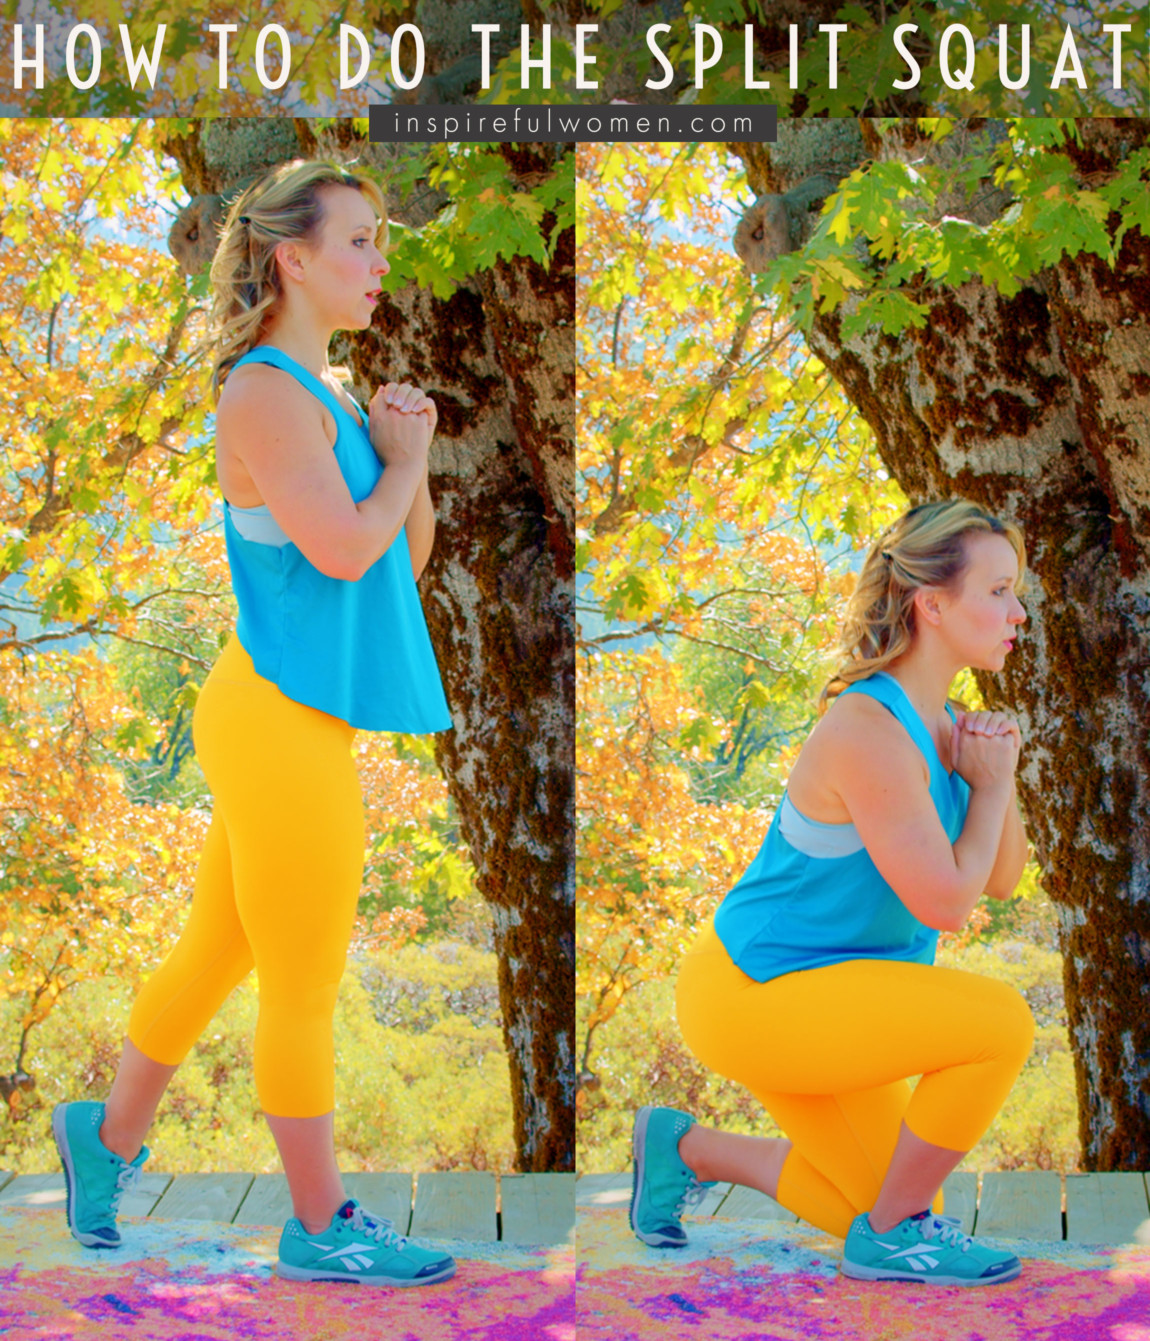 how-to-do-the-split-leg-squat-proper-form-exercise-for-women-40-and-above